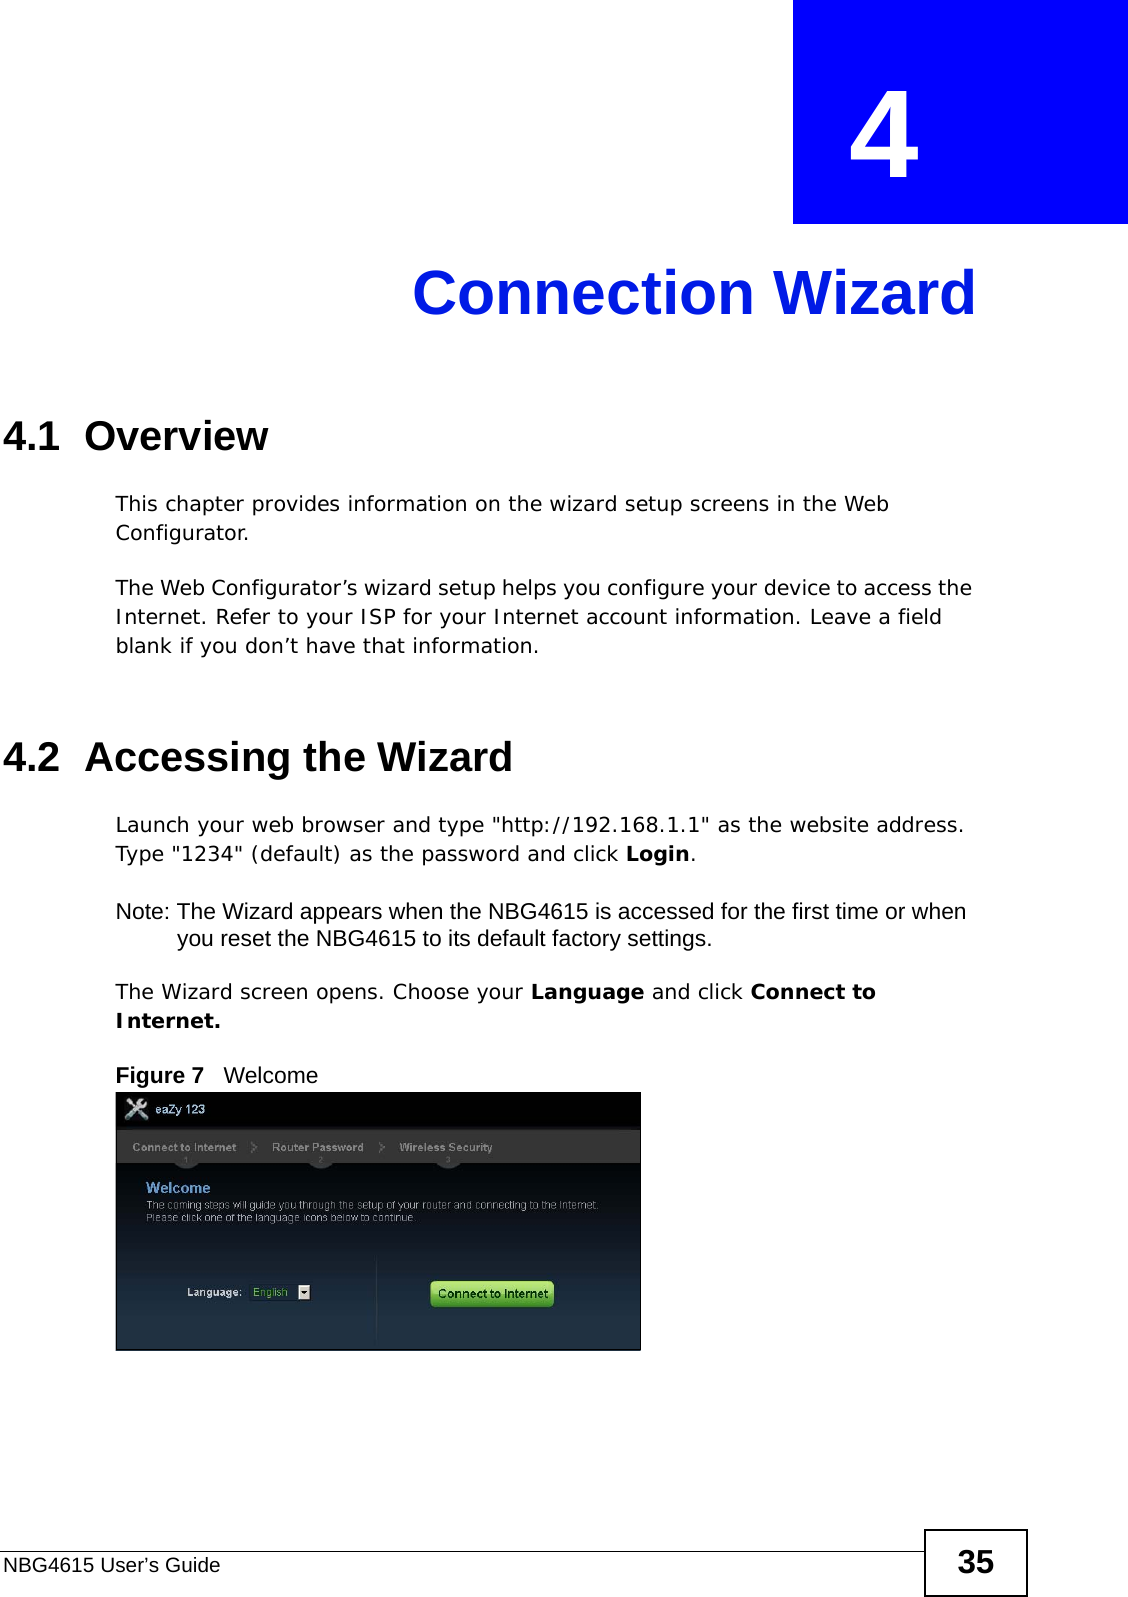 NBG4615 User’s Guide 35CHAPTER  4 Connection Wizard4.1  OverviewThis chapter provides information on the wizard setup screens in the Web Configurator.The Web Configurator’s wizard setup helps you configure your device to access the Internet. Refer to your ISP for your Internet account information. Leave a field blank if you don’t have that information.4.2  Accessing the WizardLaunch your web browser and type &quot;http://192.168.1.1&quot; as the website address. Type &quot;1234&quot; (default) as the password and click Login.Note: The Wizard appears when the NBG4615 is accessed for the first time or when you reset the NBG4615 to its default factory settings.The Wizard screen opens. Choose your Language and click Connect to Internet.Figure 7   Welcome 